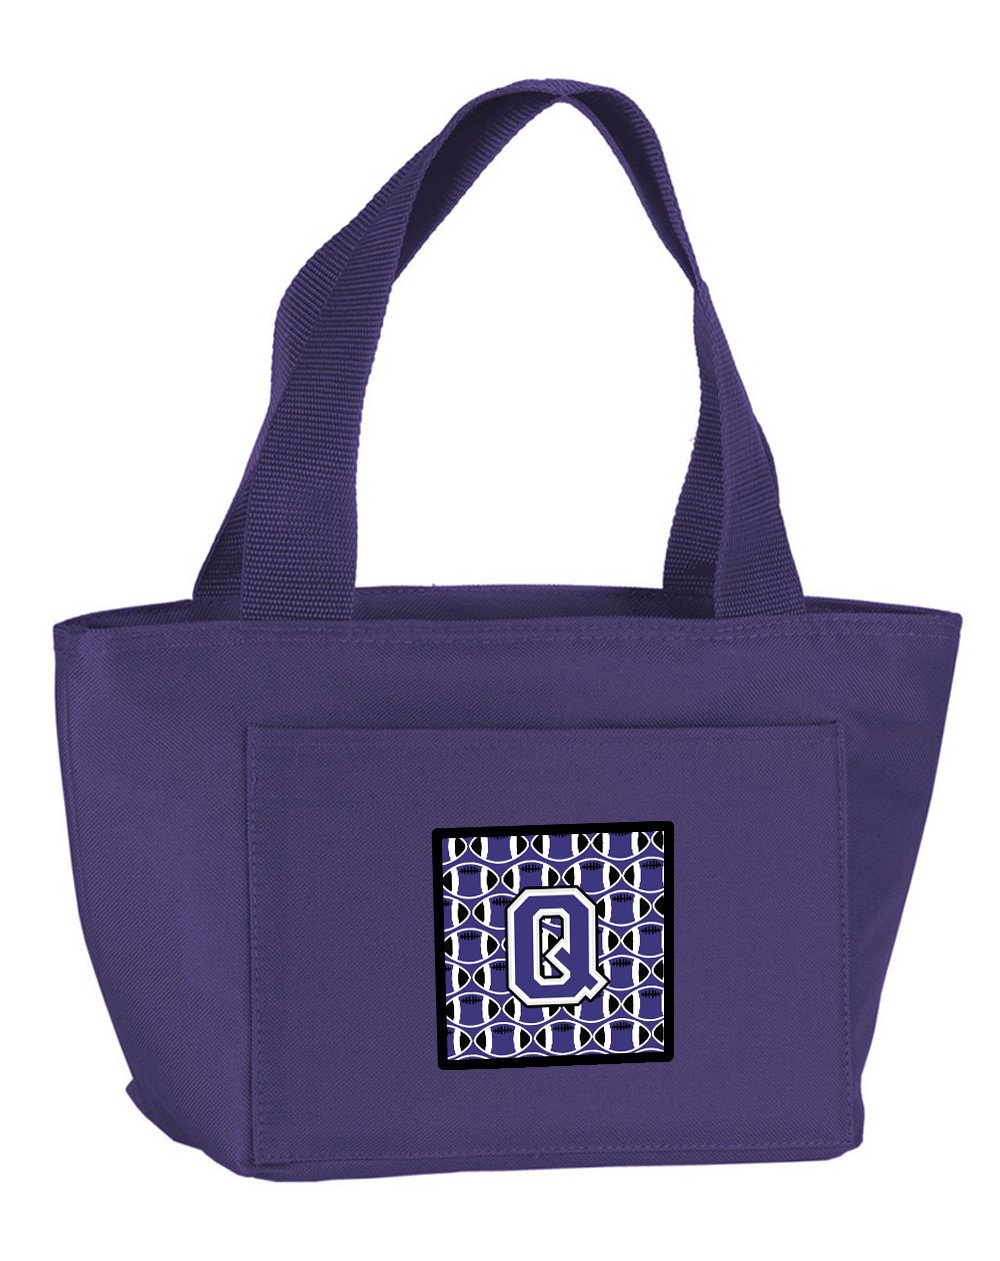 Letter Q Football Purple and White Lunch Bag CJ1068-QPR-8808 by Caroline's Treasures